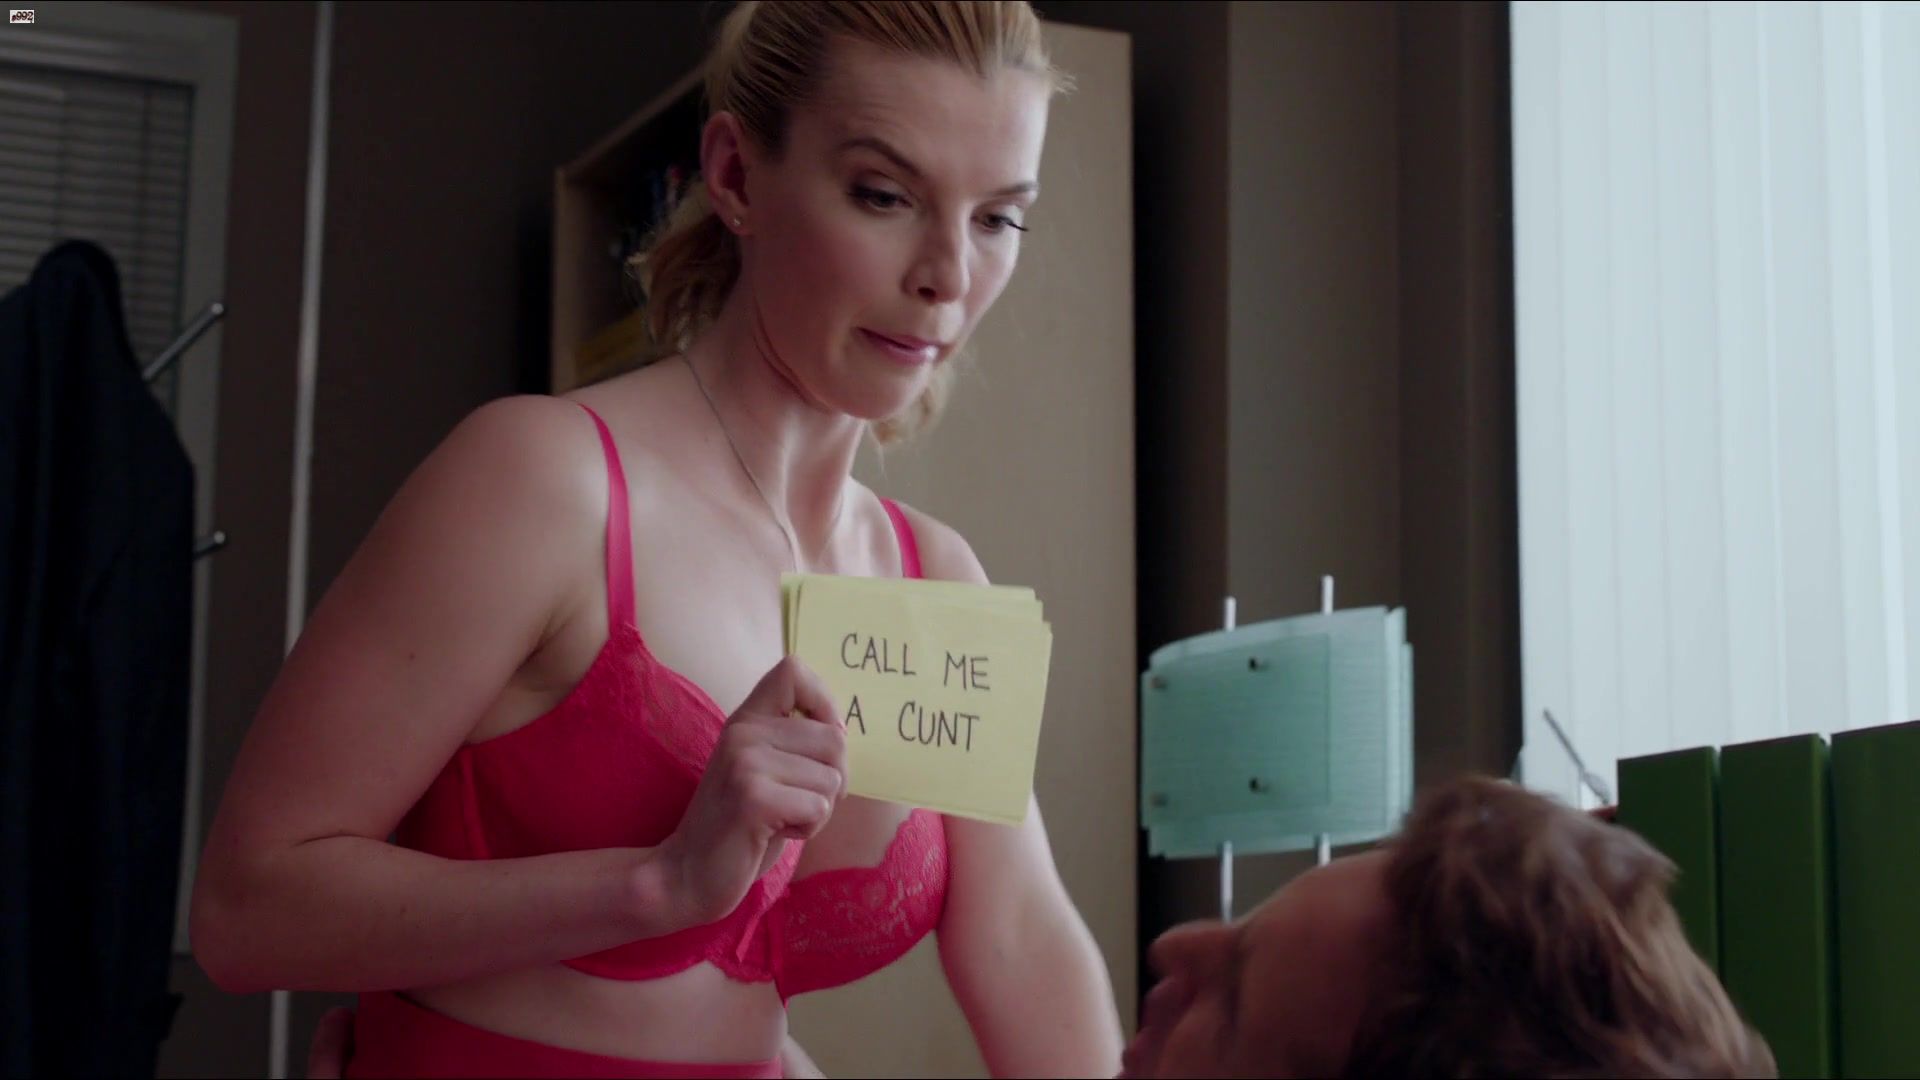 Big Ass Betty Gilpin topless cowgirl scene of the TV show "Nurse Jackie" Bitch - 1